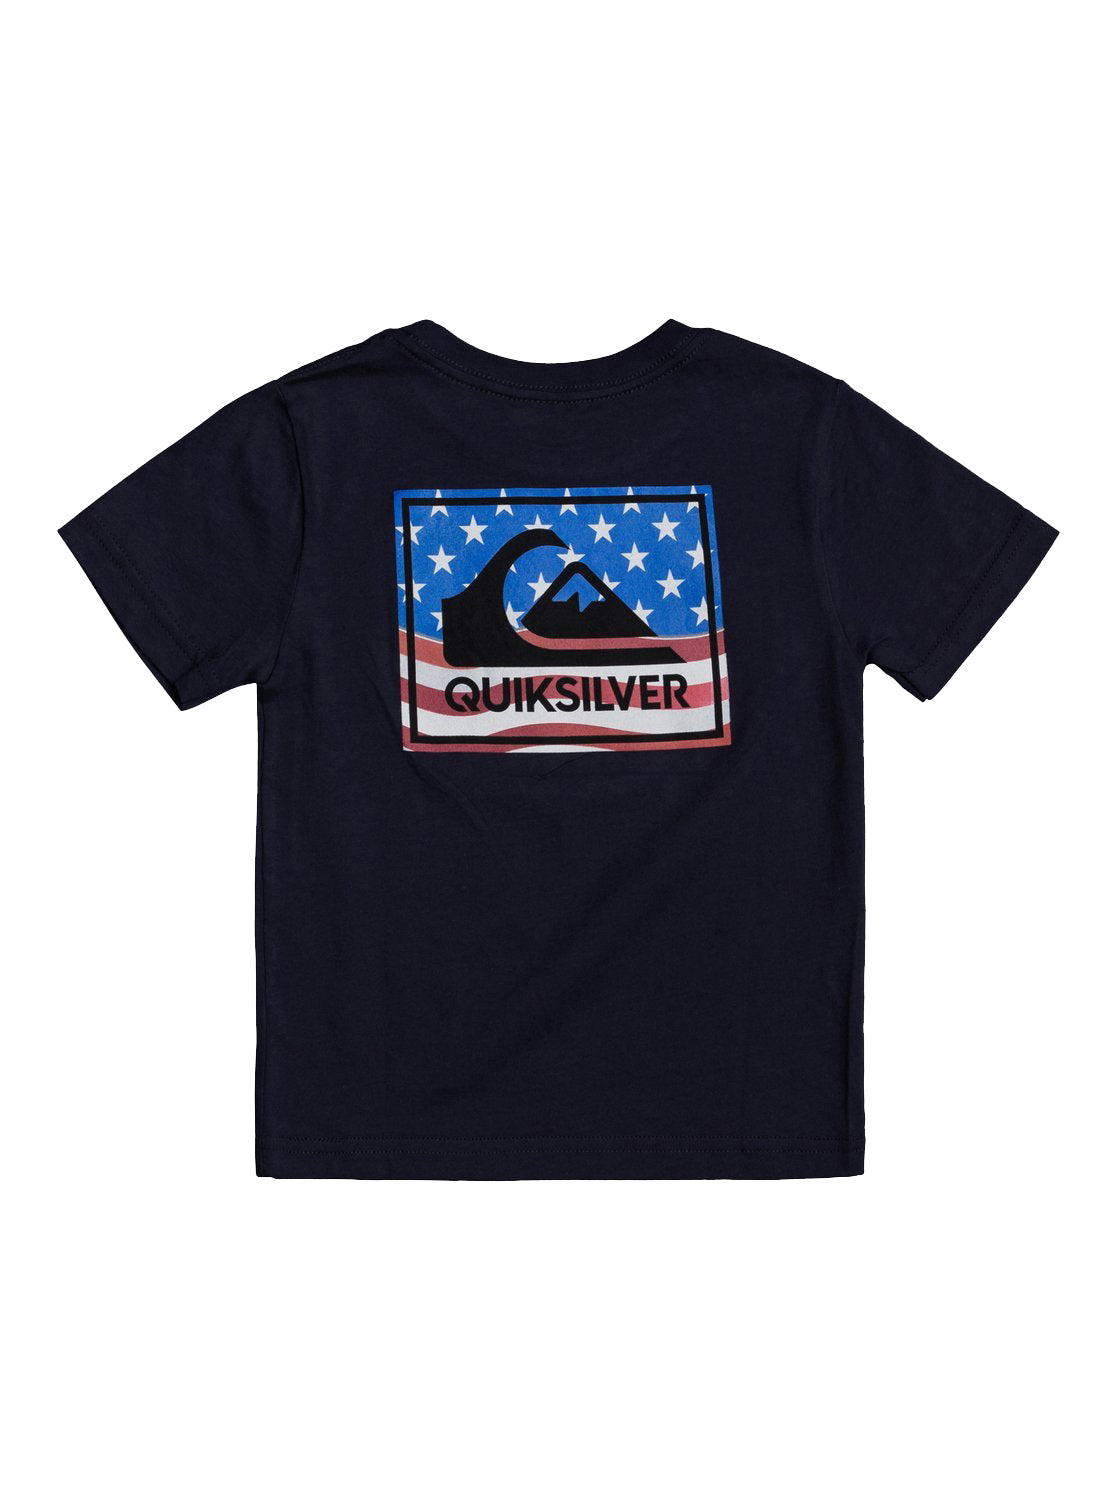 Quiksilver Architexure Youth Tee